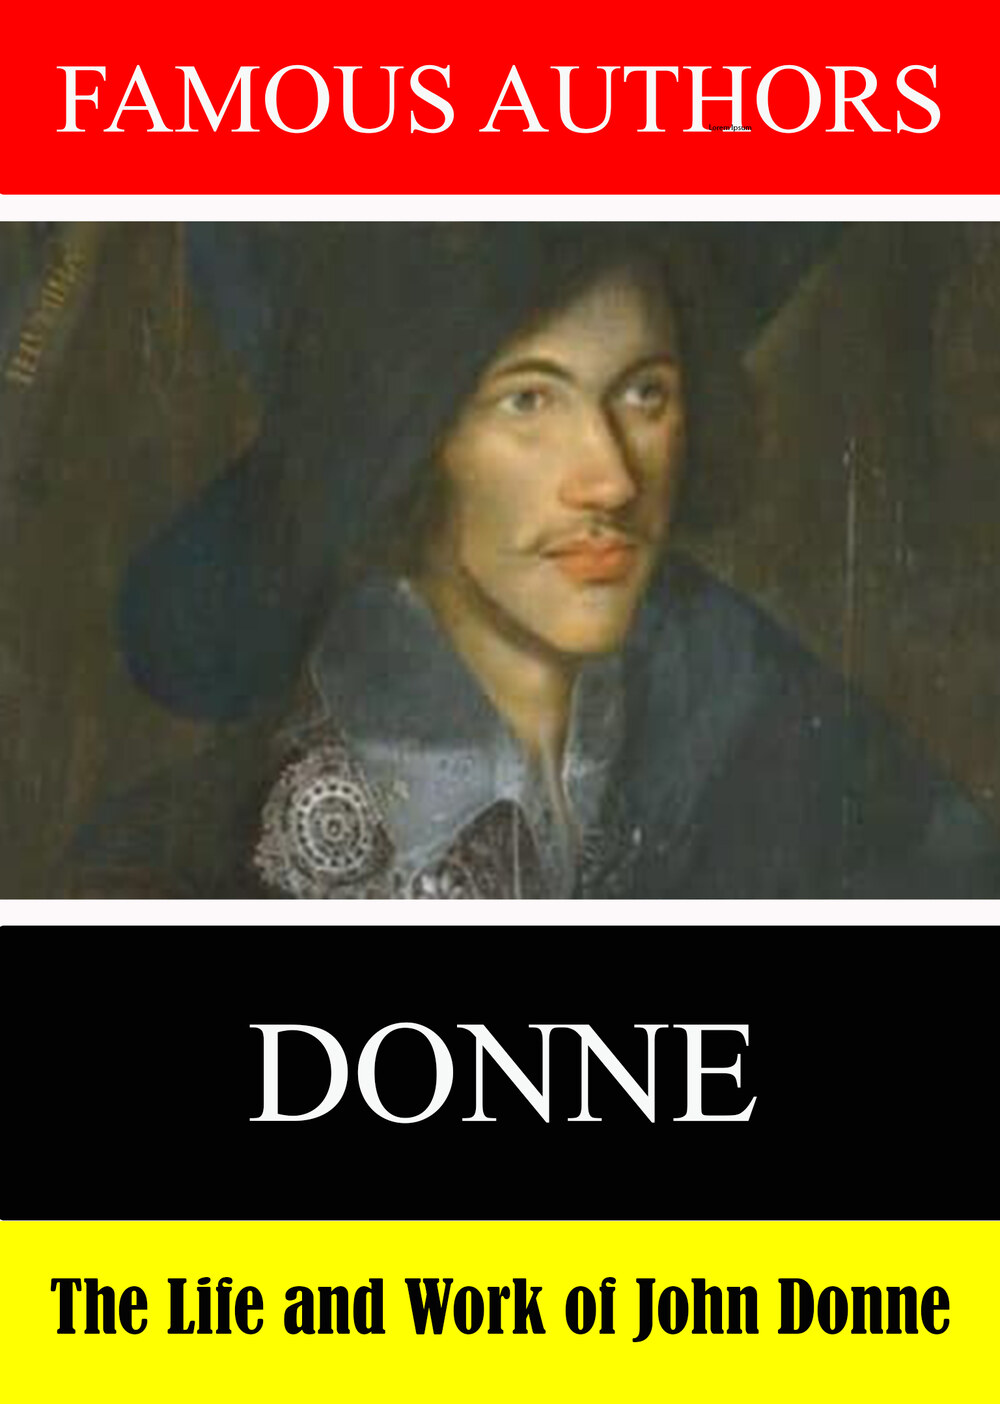 L7879 - Famous Authors: The Life and Work of John Donne